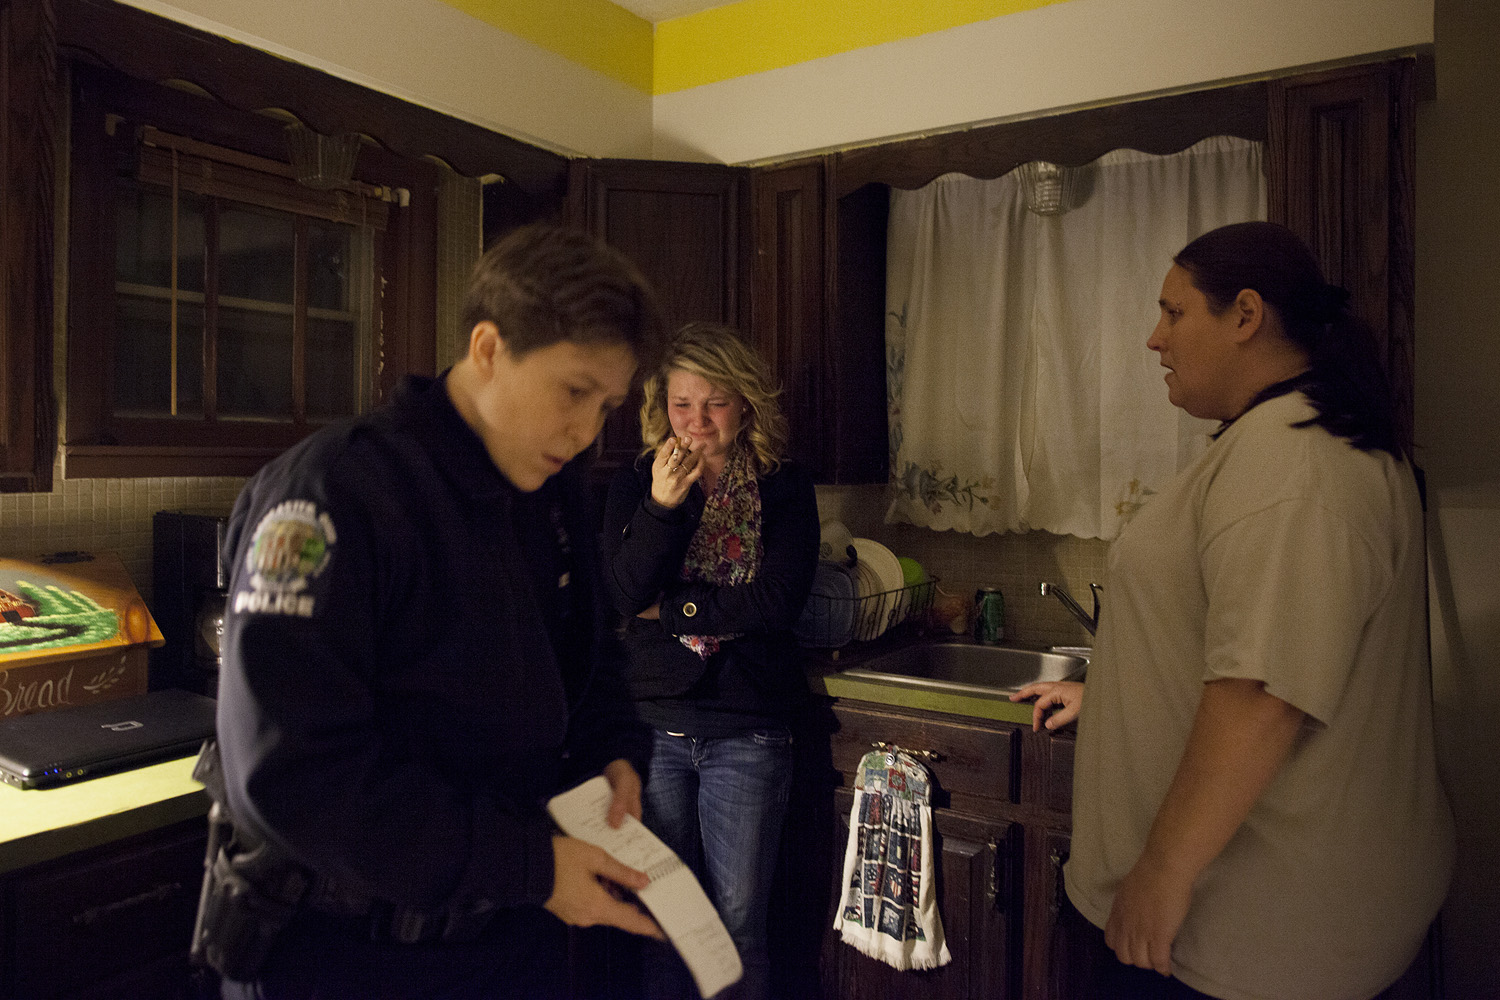 Around half past midnight, the police arrived after receiving a call from a resident in the house (pictured at right). Maggie cried and smoked a cigarette as an officer from the Lancaster Police Department tried to keep her separated from Shane and coax out the truth about the assault.